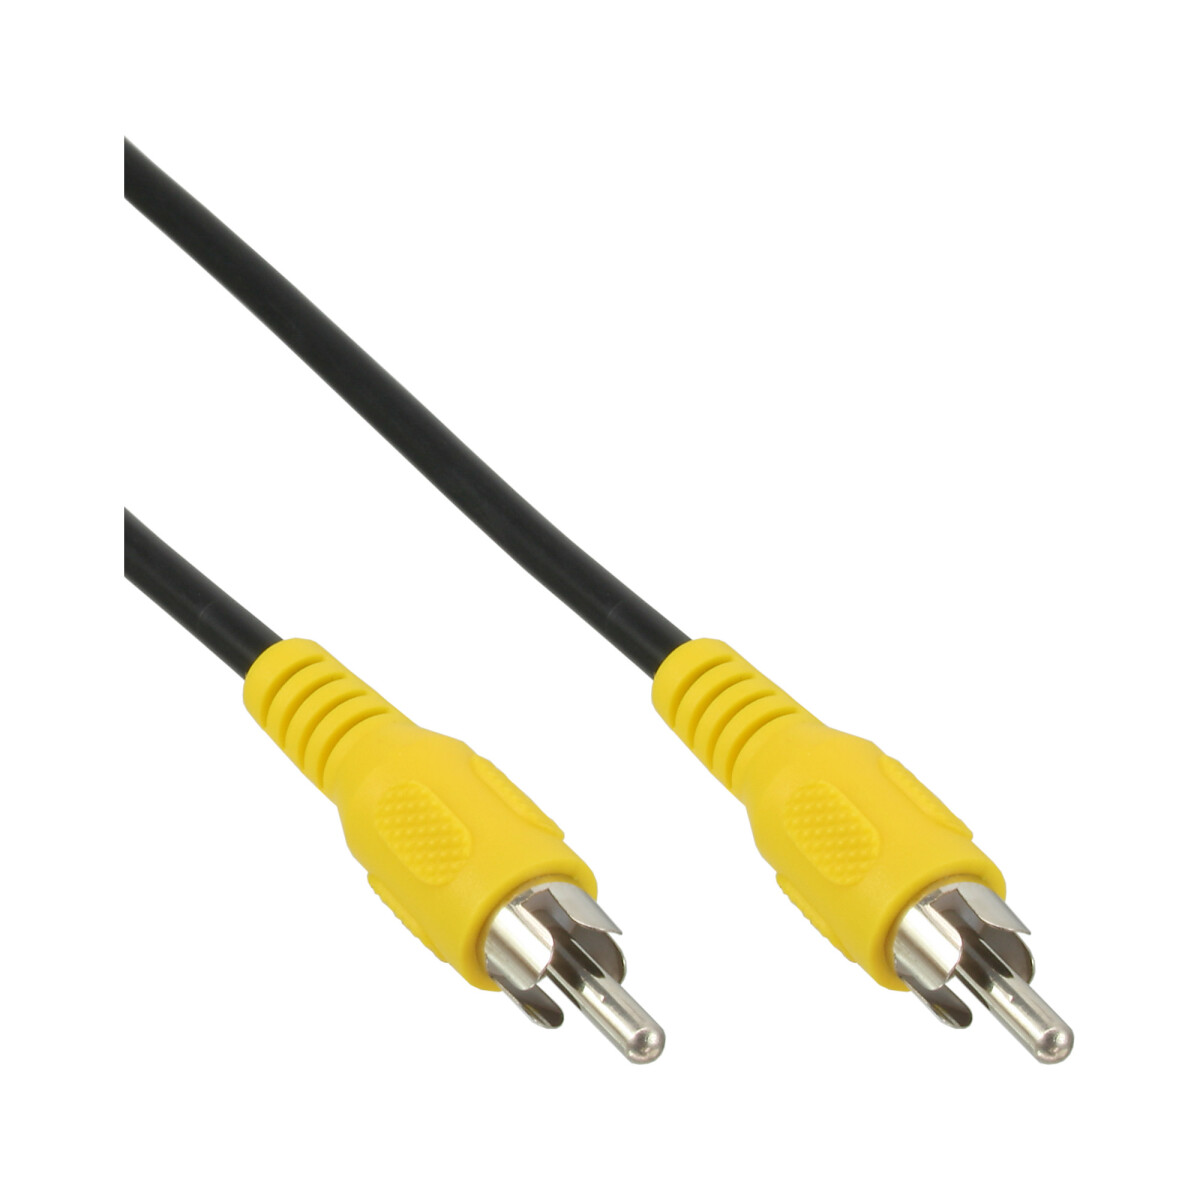 InLine® Video cable, 1x RCA M/M, yellow plugs, 5m